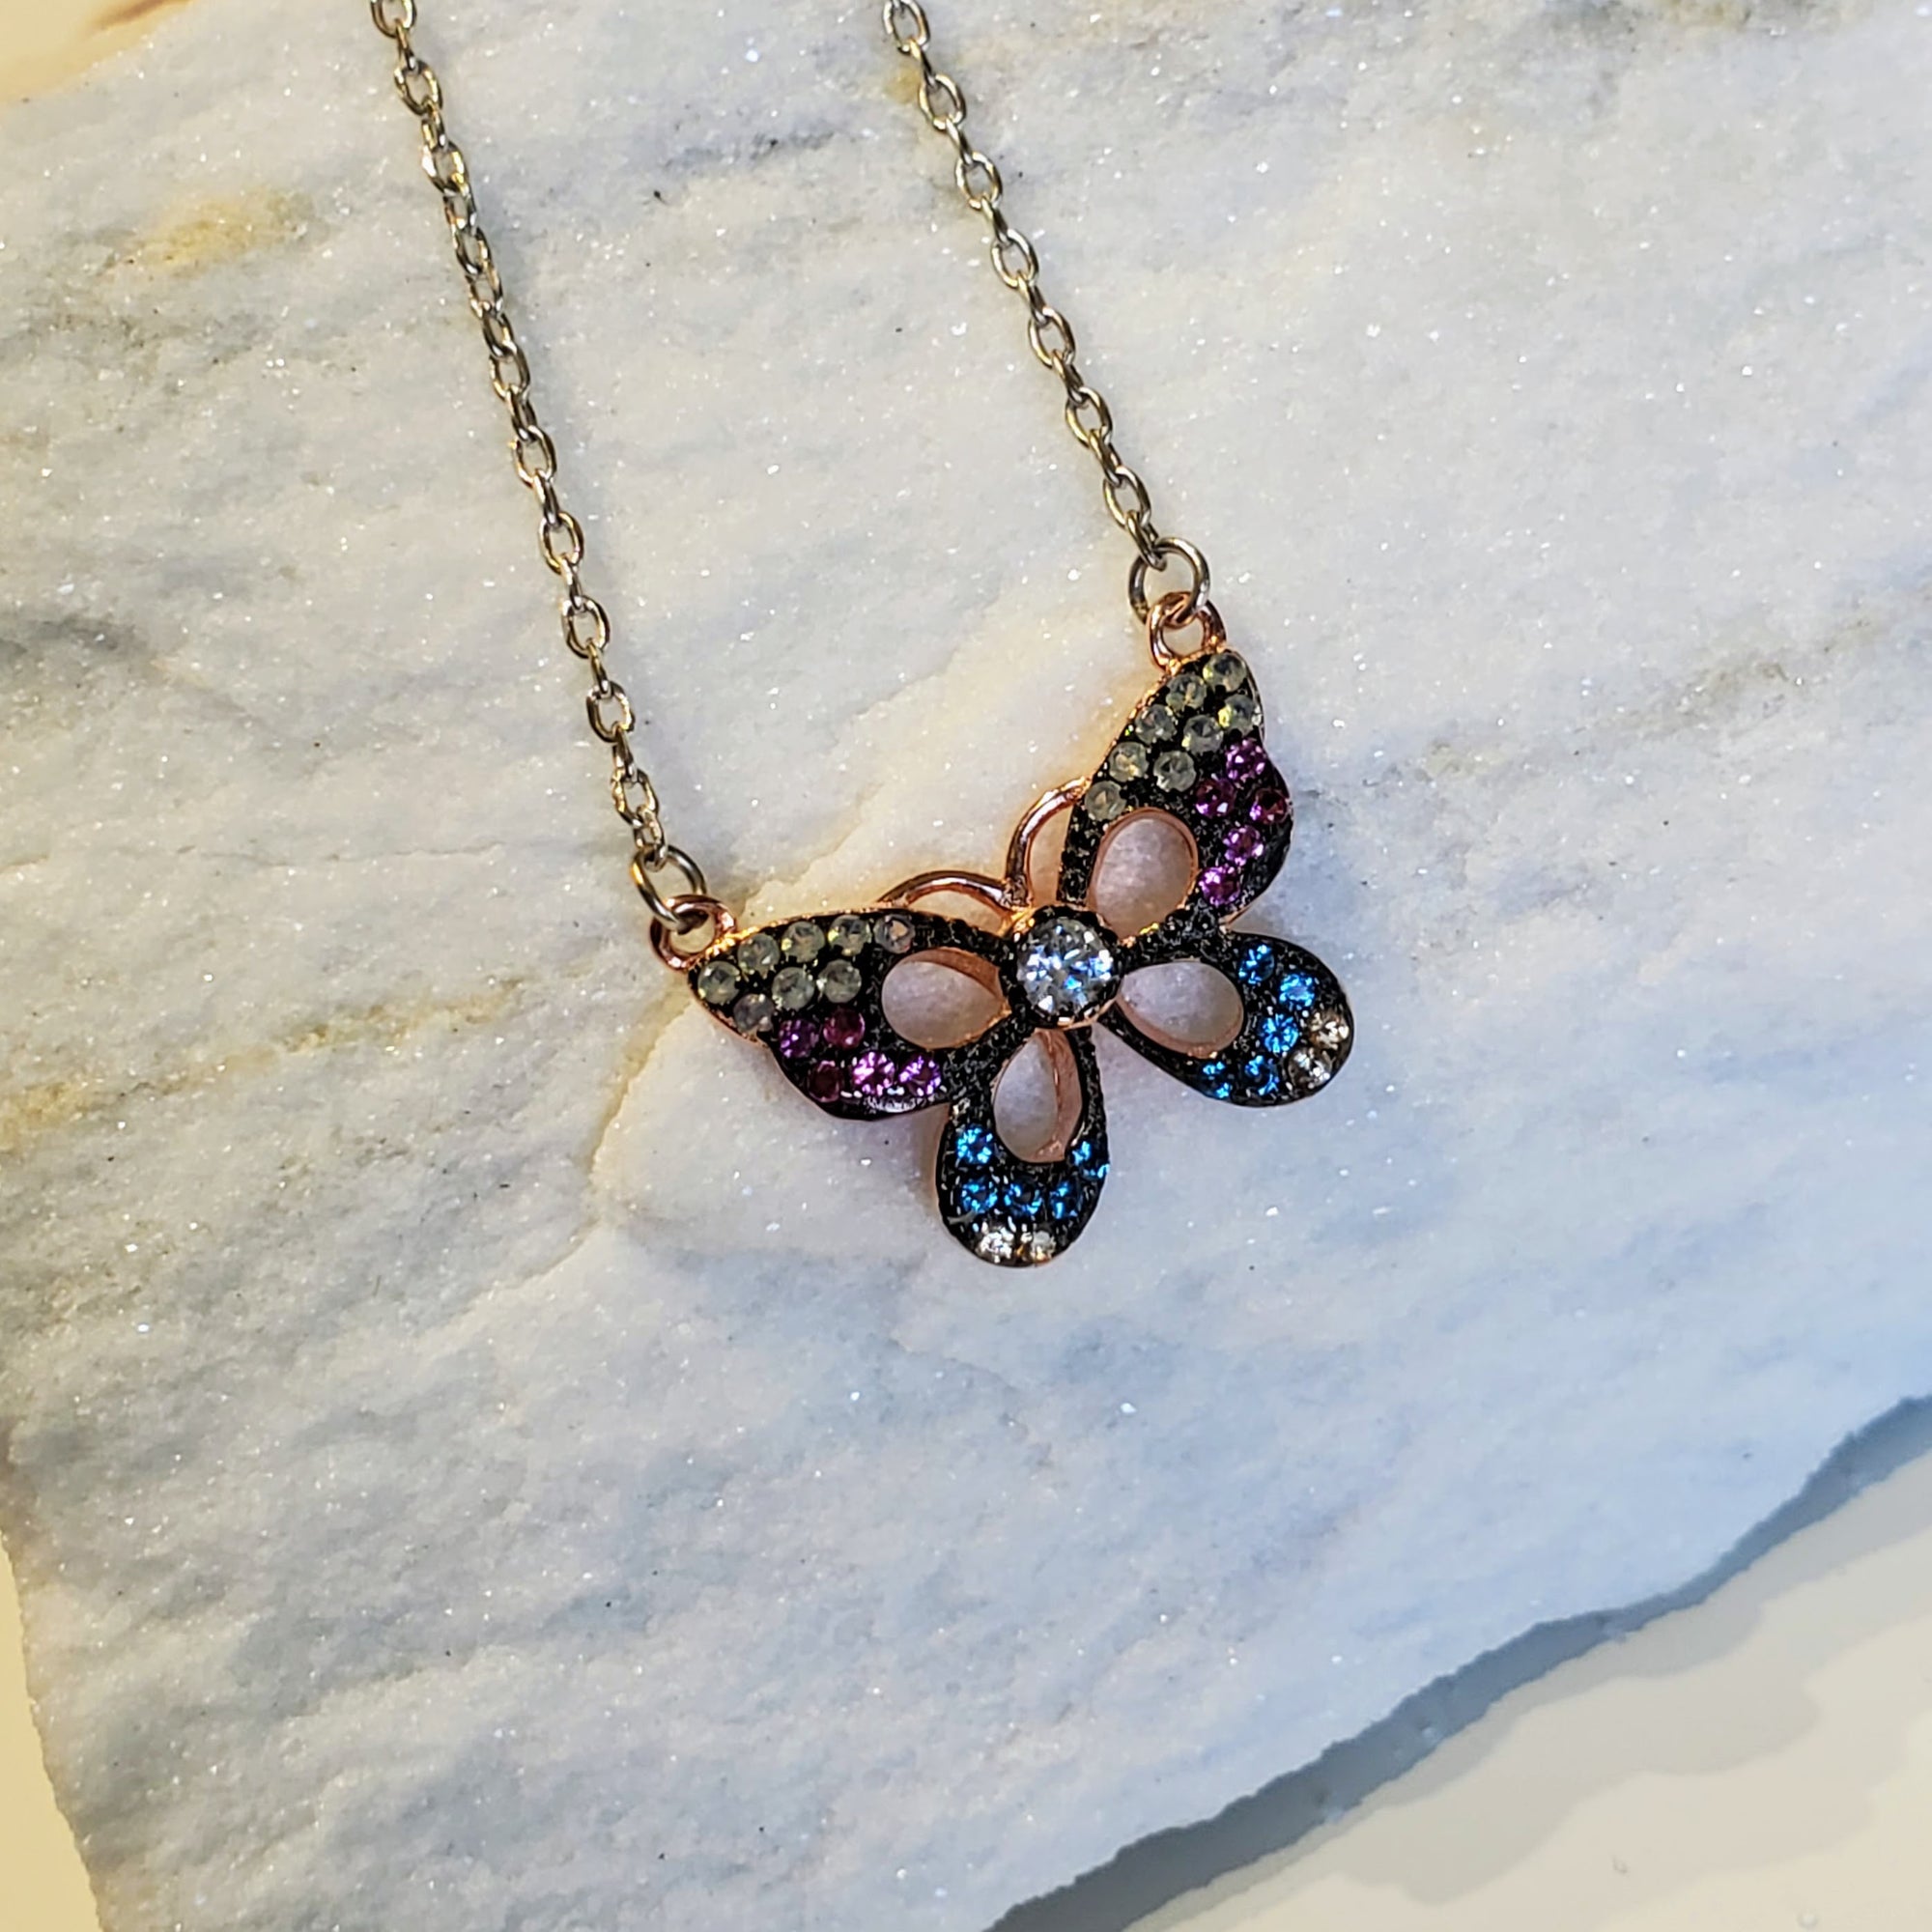 Multicolor Butterfly Necklace